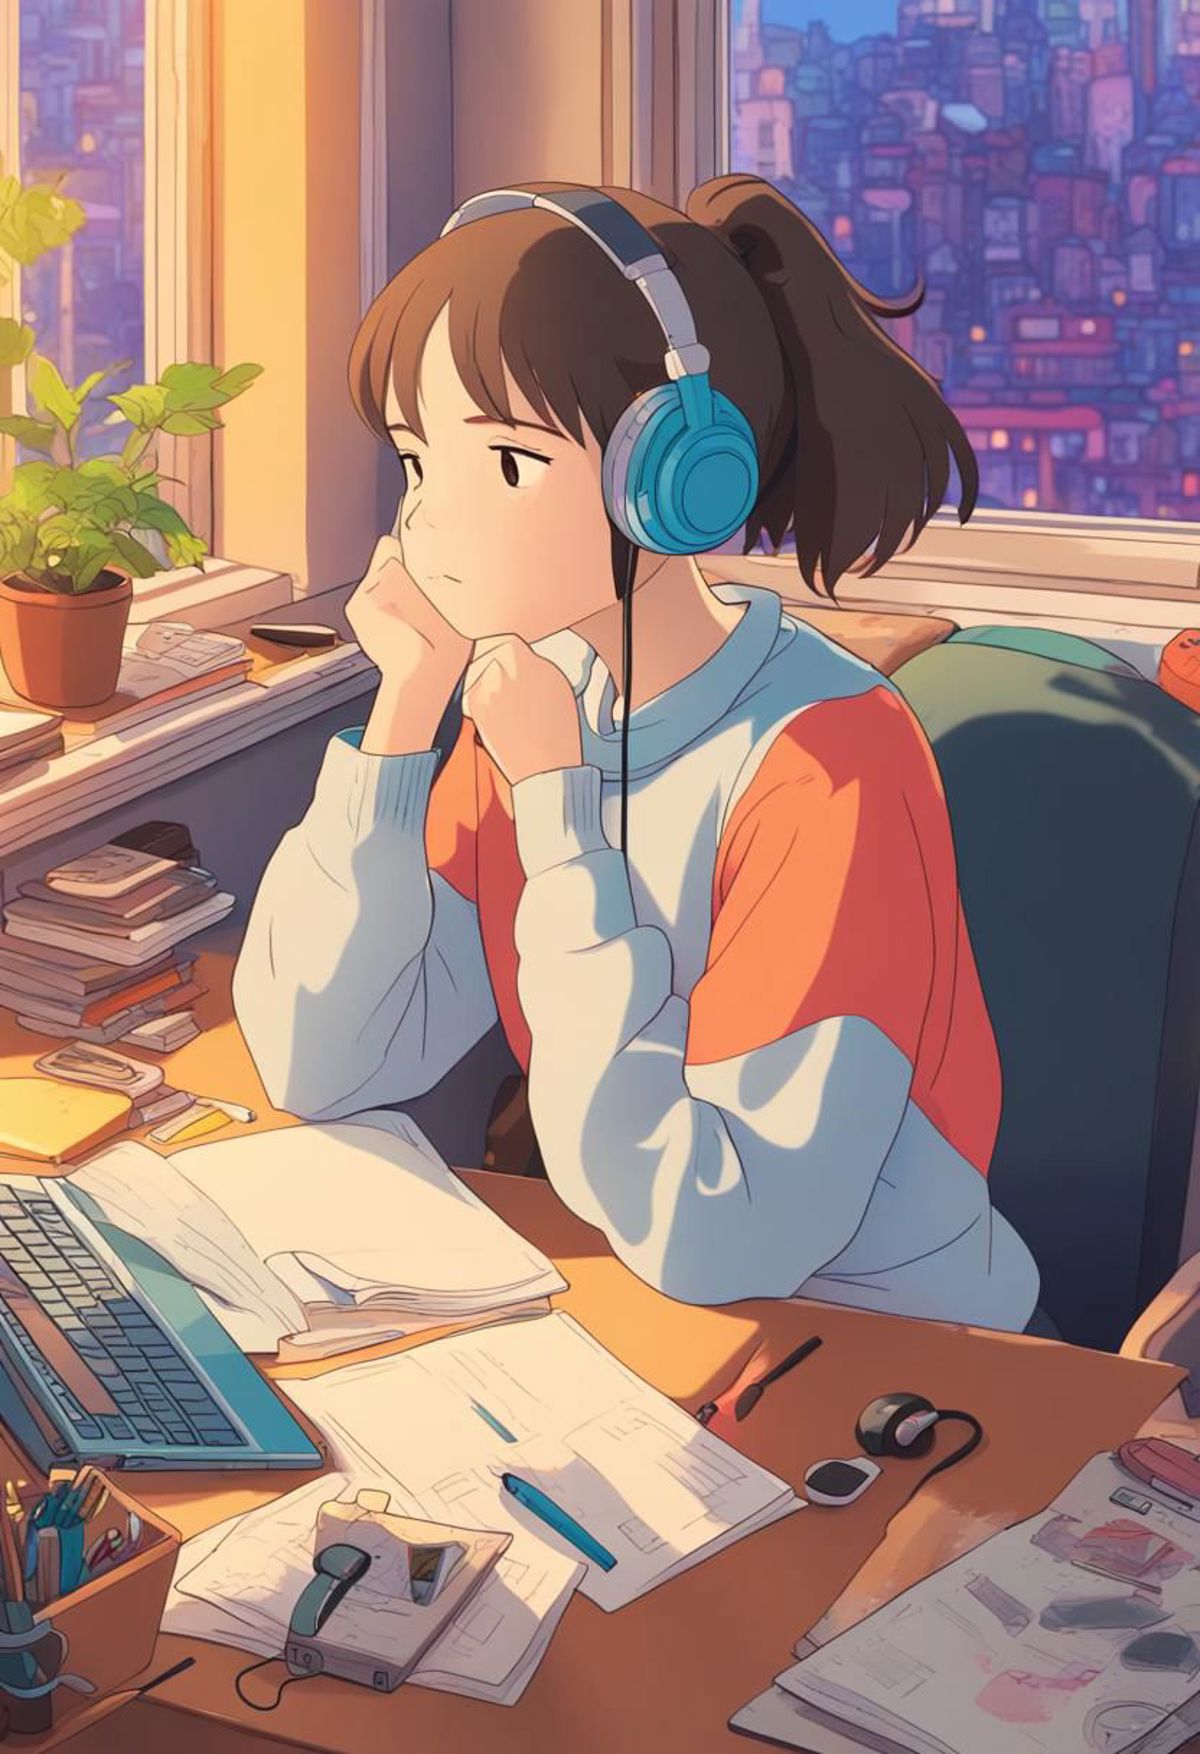 An Asian girl wearing headphones and a white sweater is sitting in front of a computer desk with a keyboard and papers.